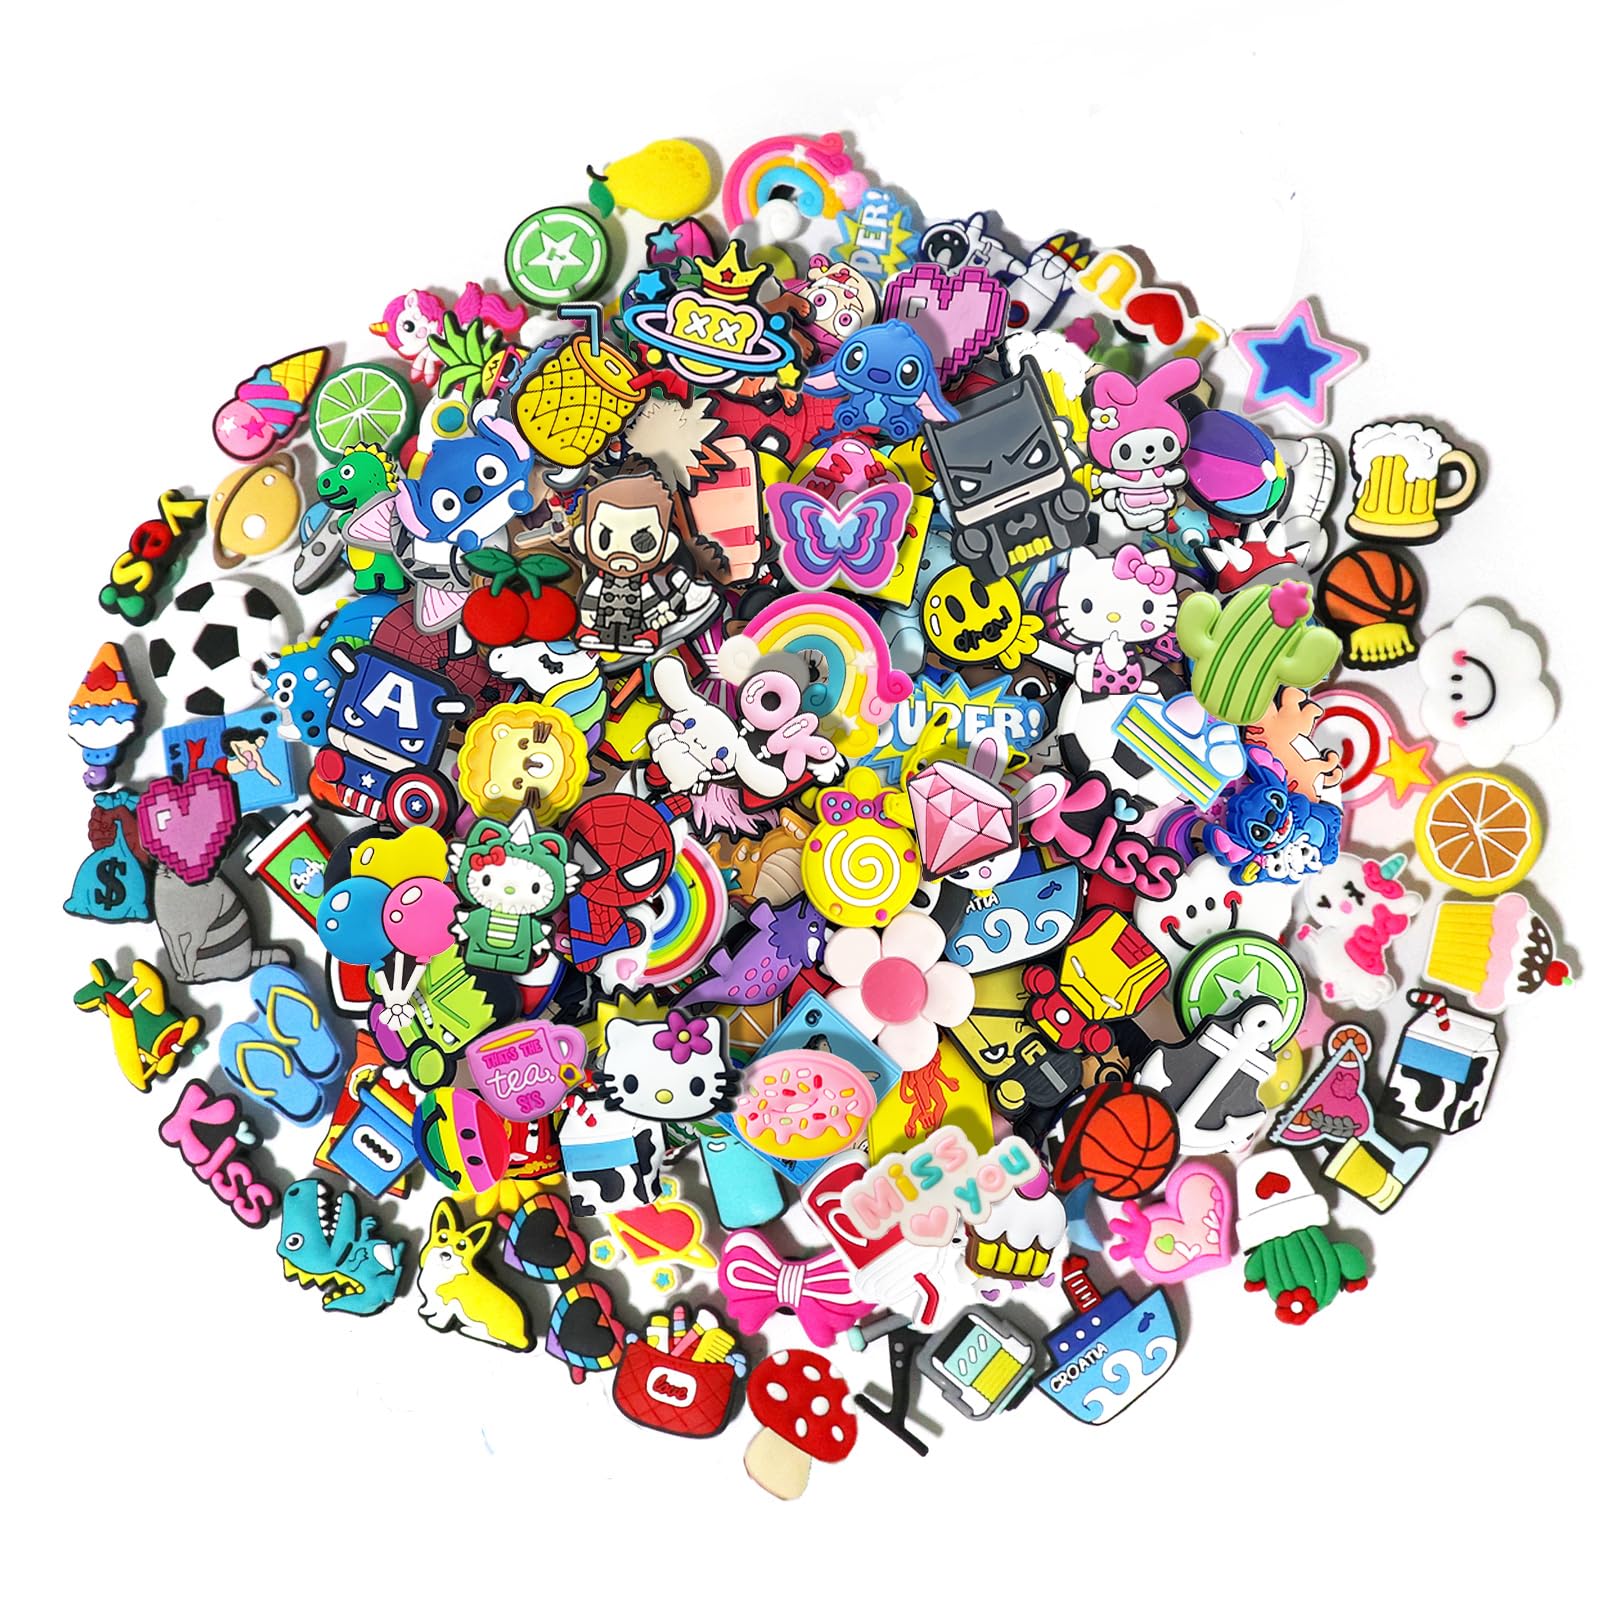 35,50,100 Pcs Random PVC Shoe Charms,Garden Shoes Cute Shoe Charms Wristband Bracelet Decoration with Different Designs Shape for Girls,Boys and Adult Party Gift(35)